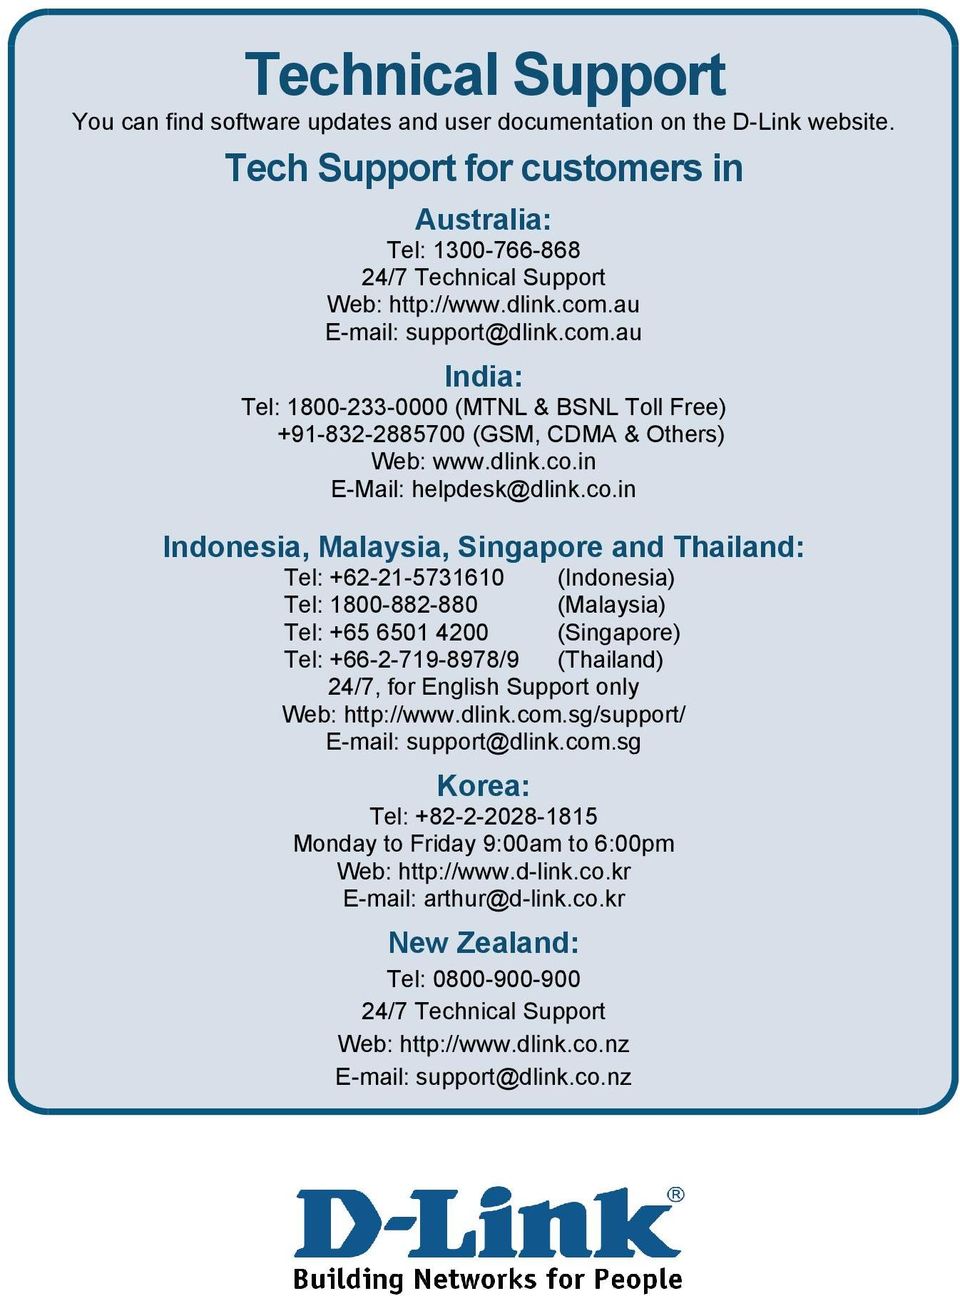 Singapore and Thailand: Tel: +62-21-5731610 (Indonesia) Tel: 1800-882-880 (Malaysia) Tel: +65 6501 4200 (Singapore) Tel: +66-2-719-8978/9 (Thailand) 24/7, for English Support only Web: http://www.